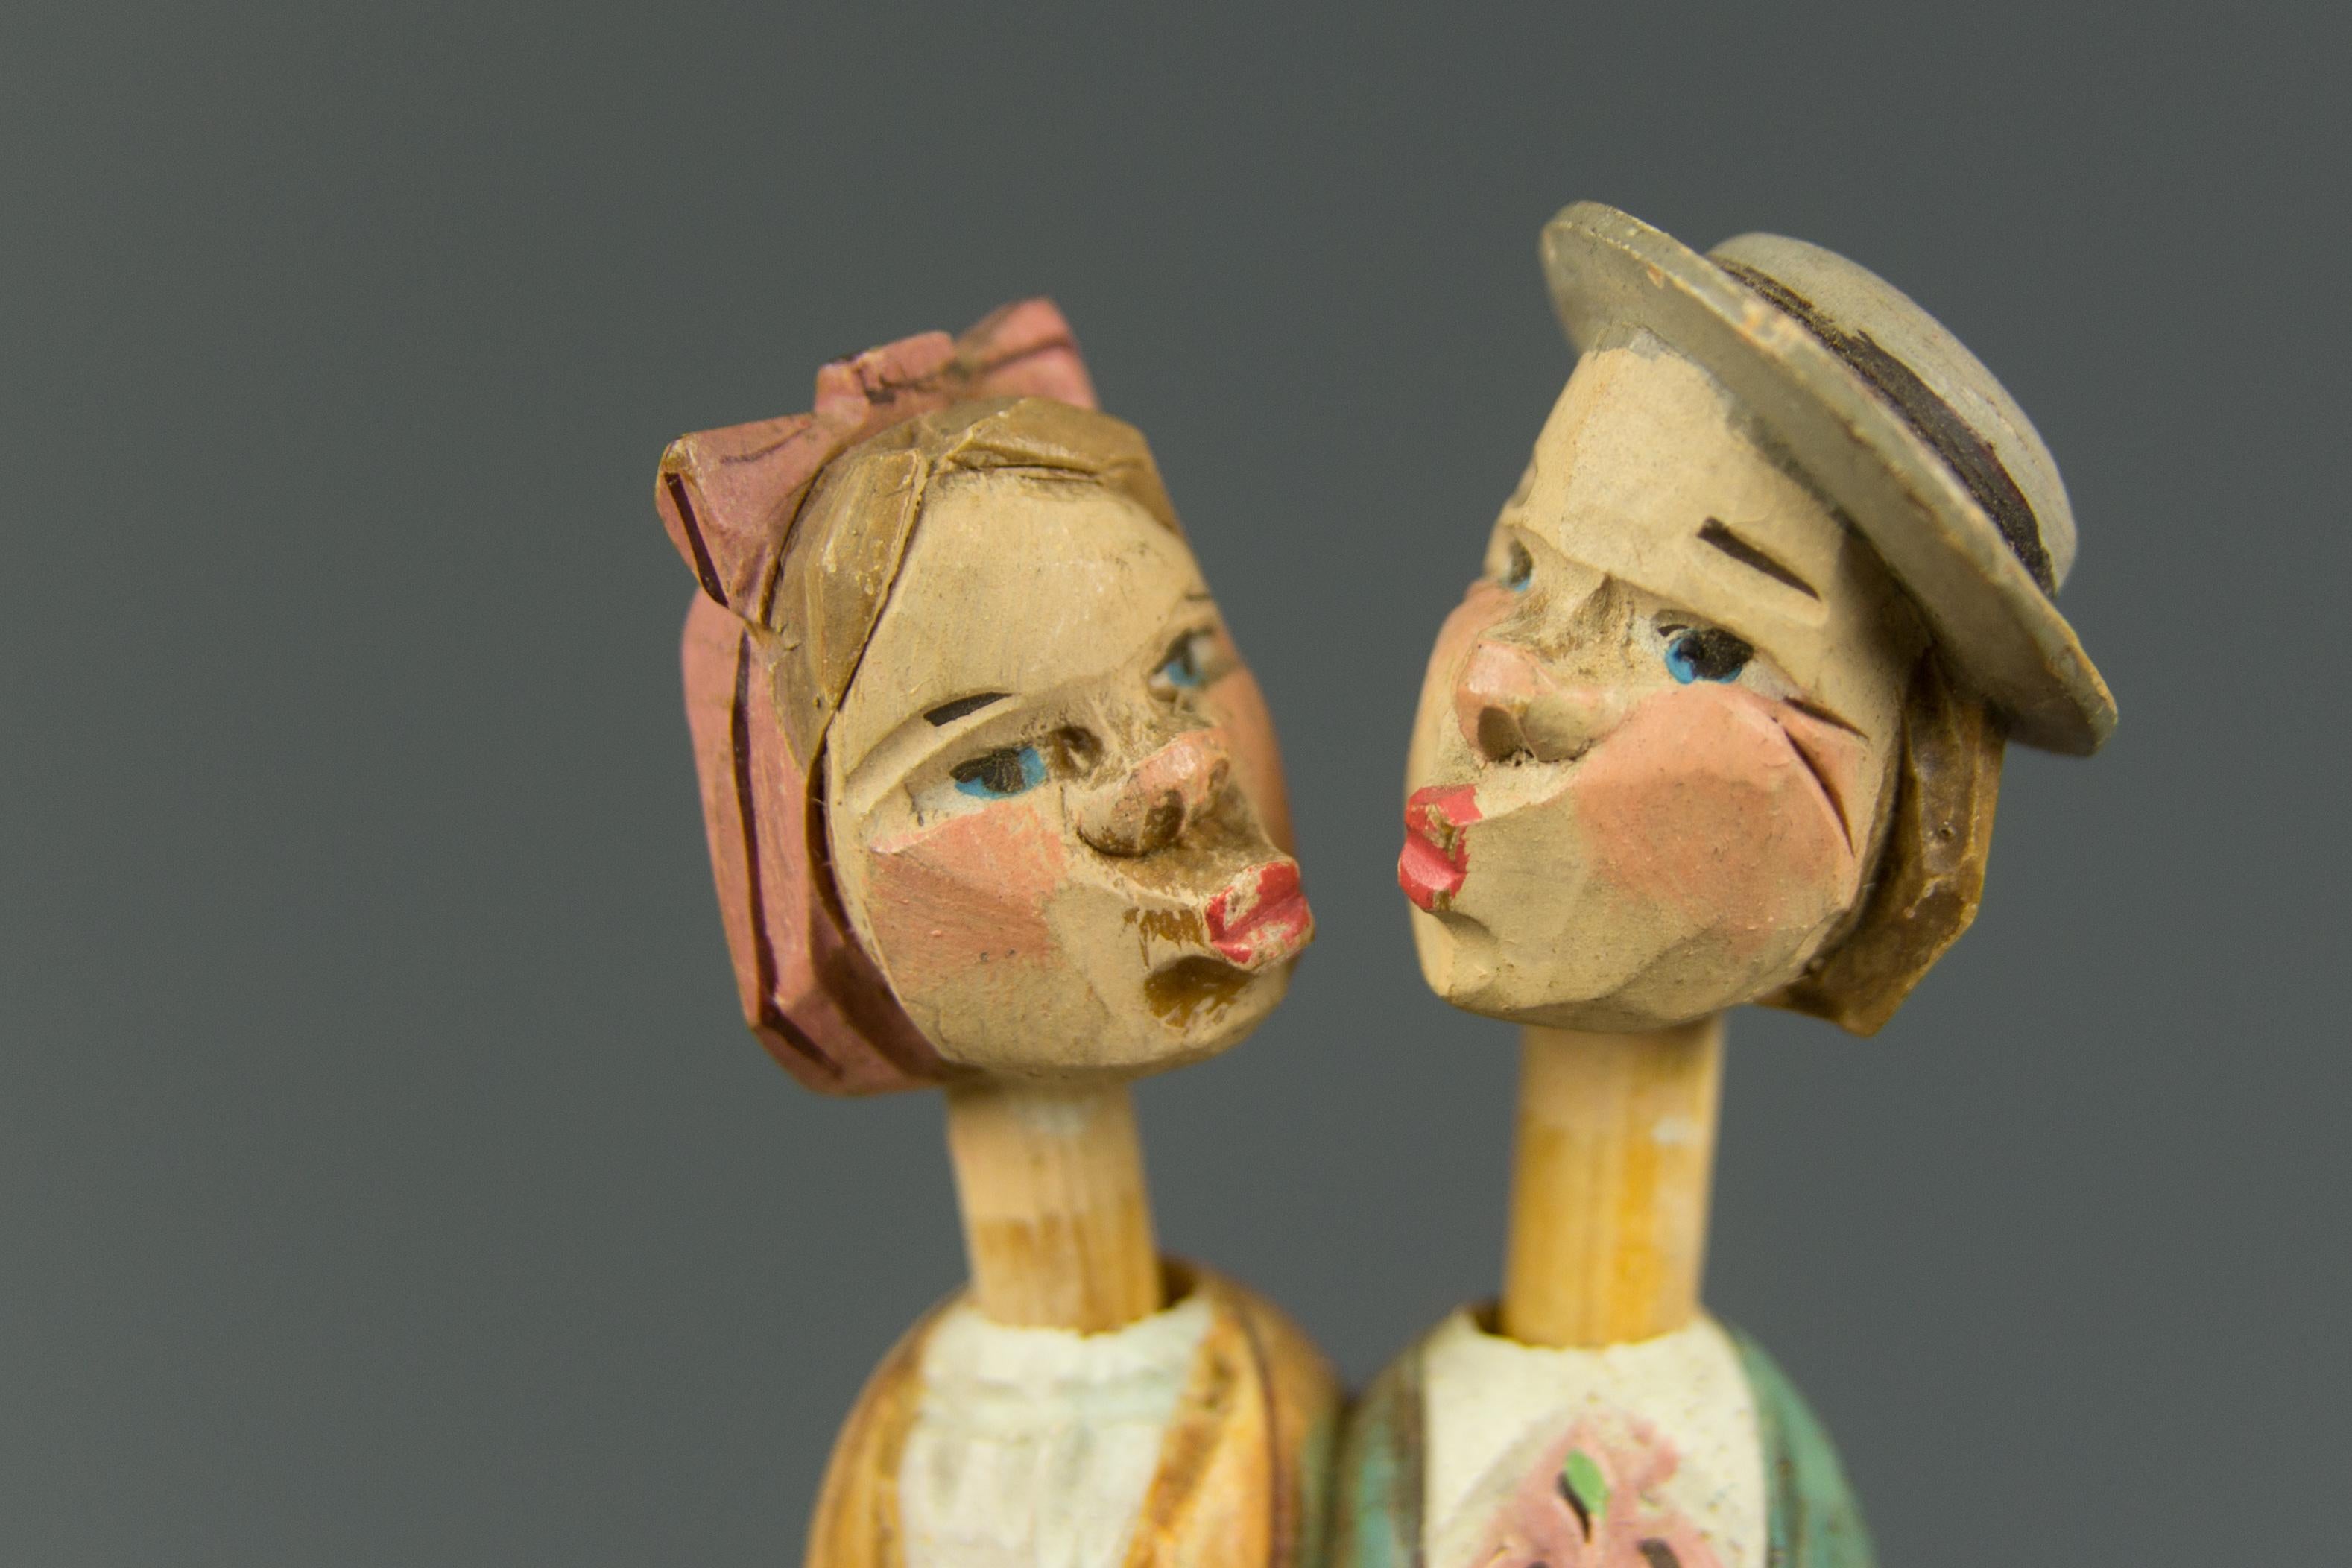 German Hand Carved and Painted Mechanical Wooden Bottle Stopper Kissing Couple, 1950s